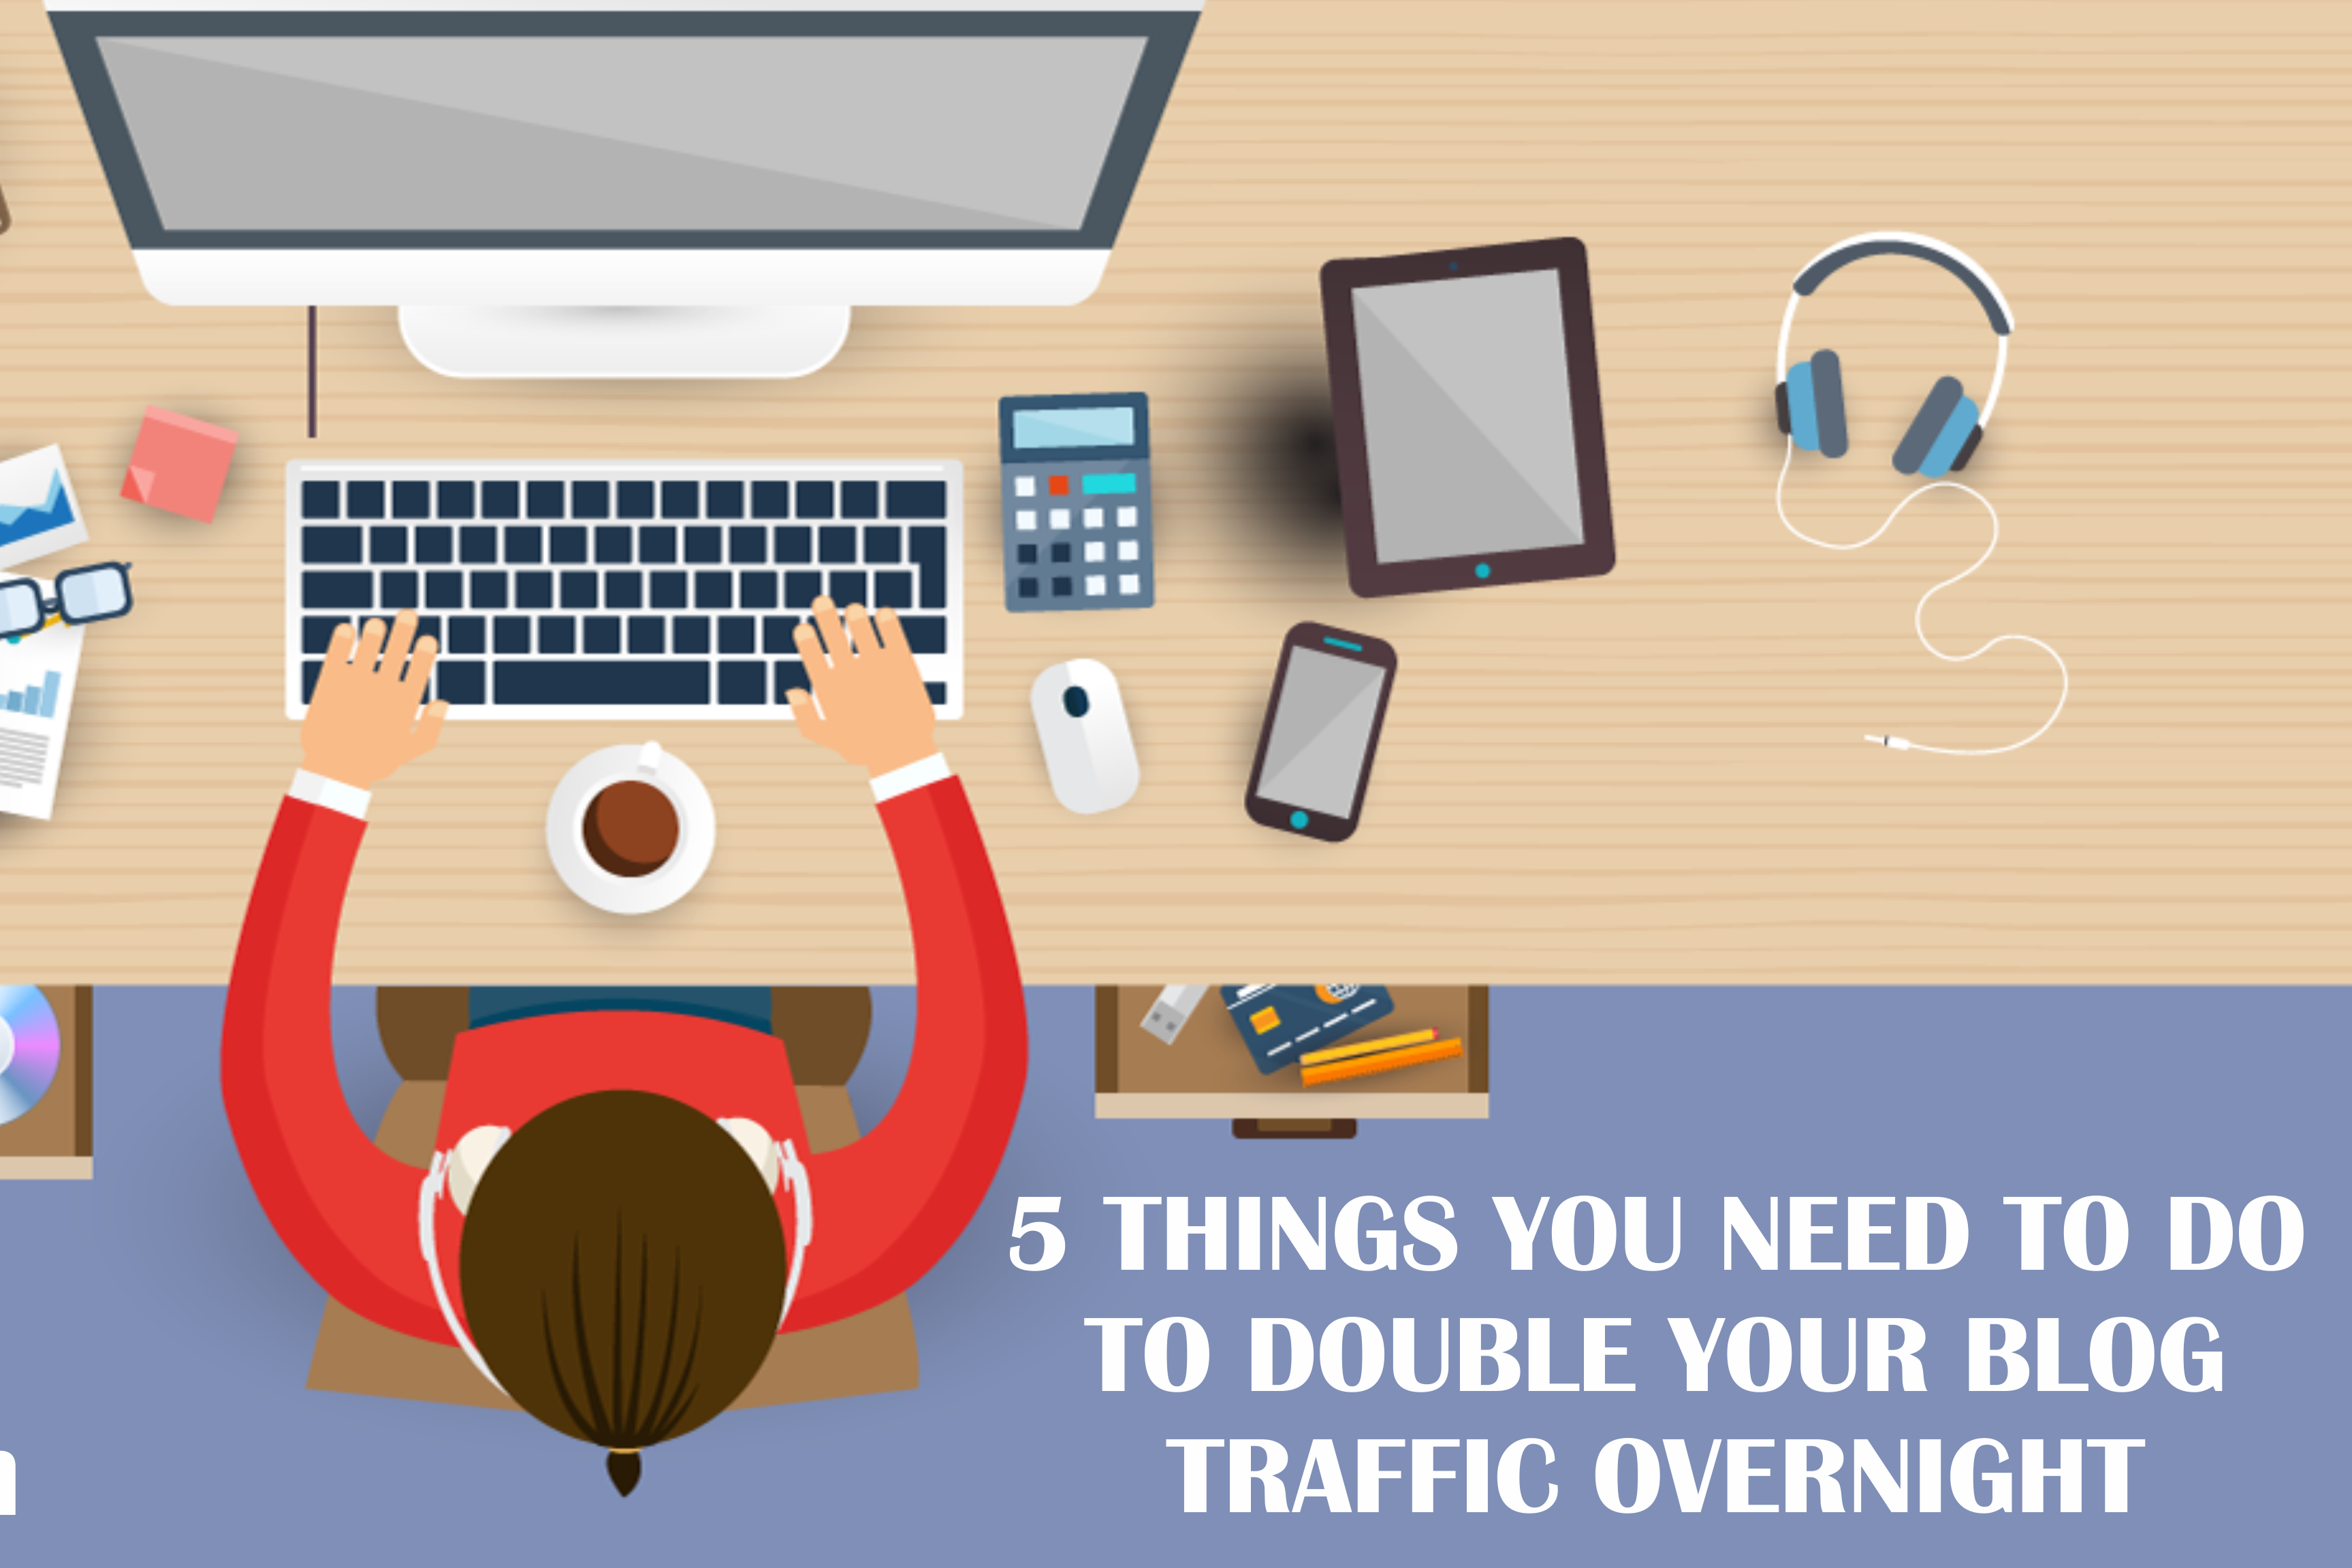 Drive massive traffic to your blog